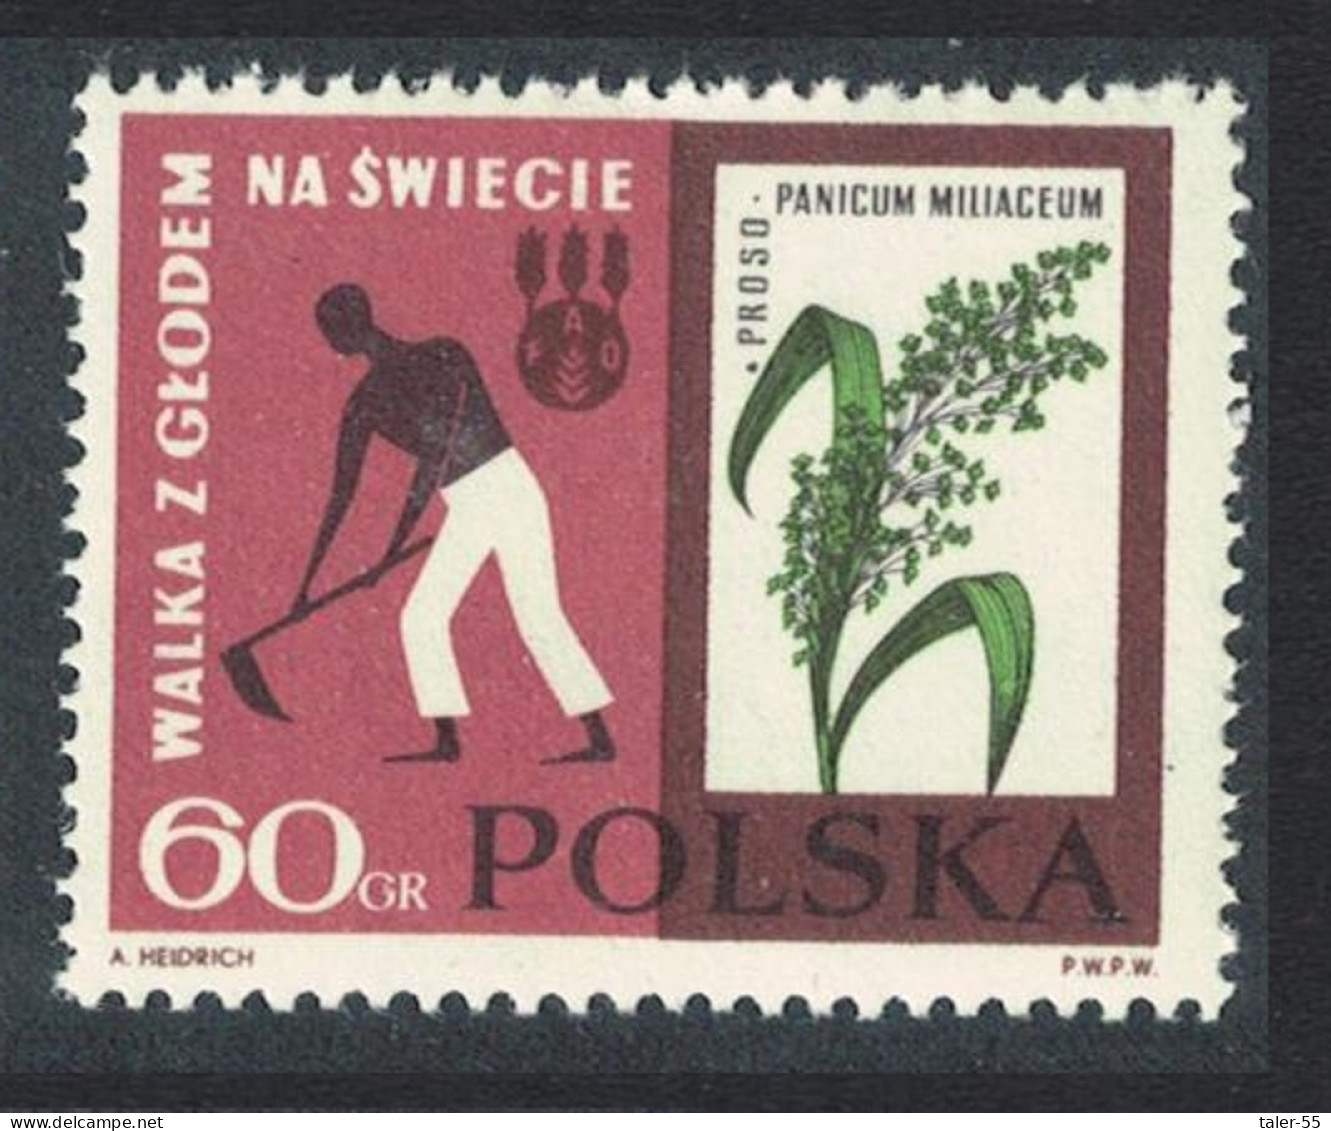 Poland Freedom From Hunger Millet And Hoeing Key Value 1963 MNH SG#1359 Sc#1113 - Unused Stamps